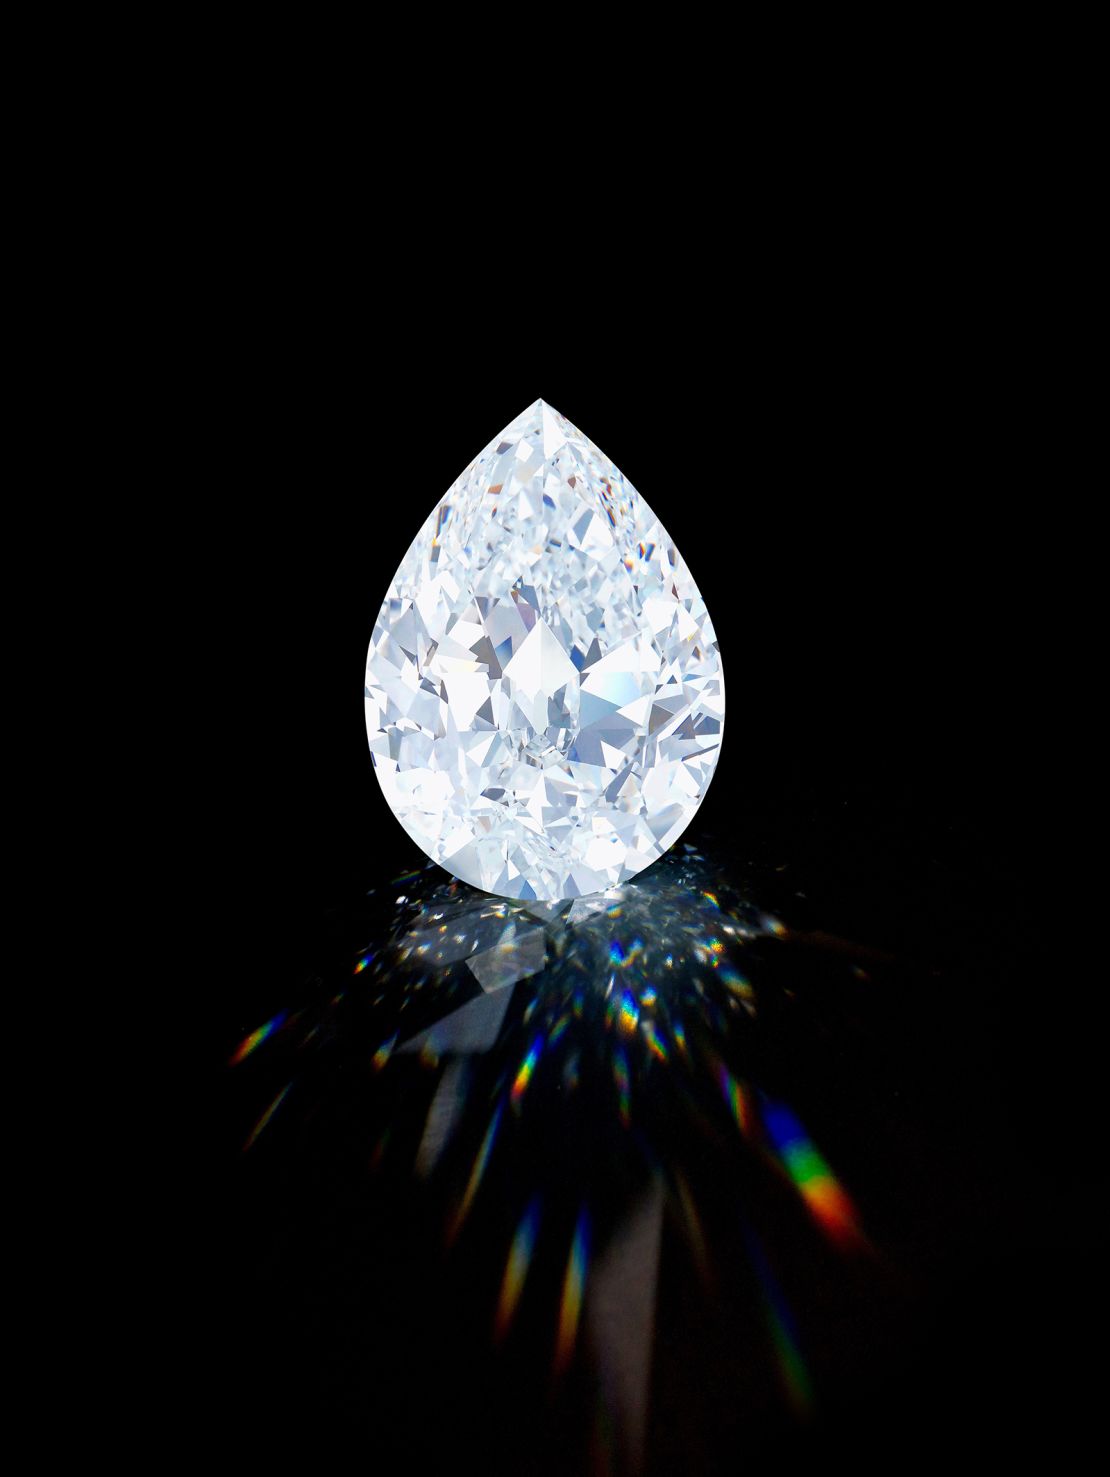 The gem is one of only 10 diamonds of its size and quality to appear at auction.